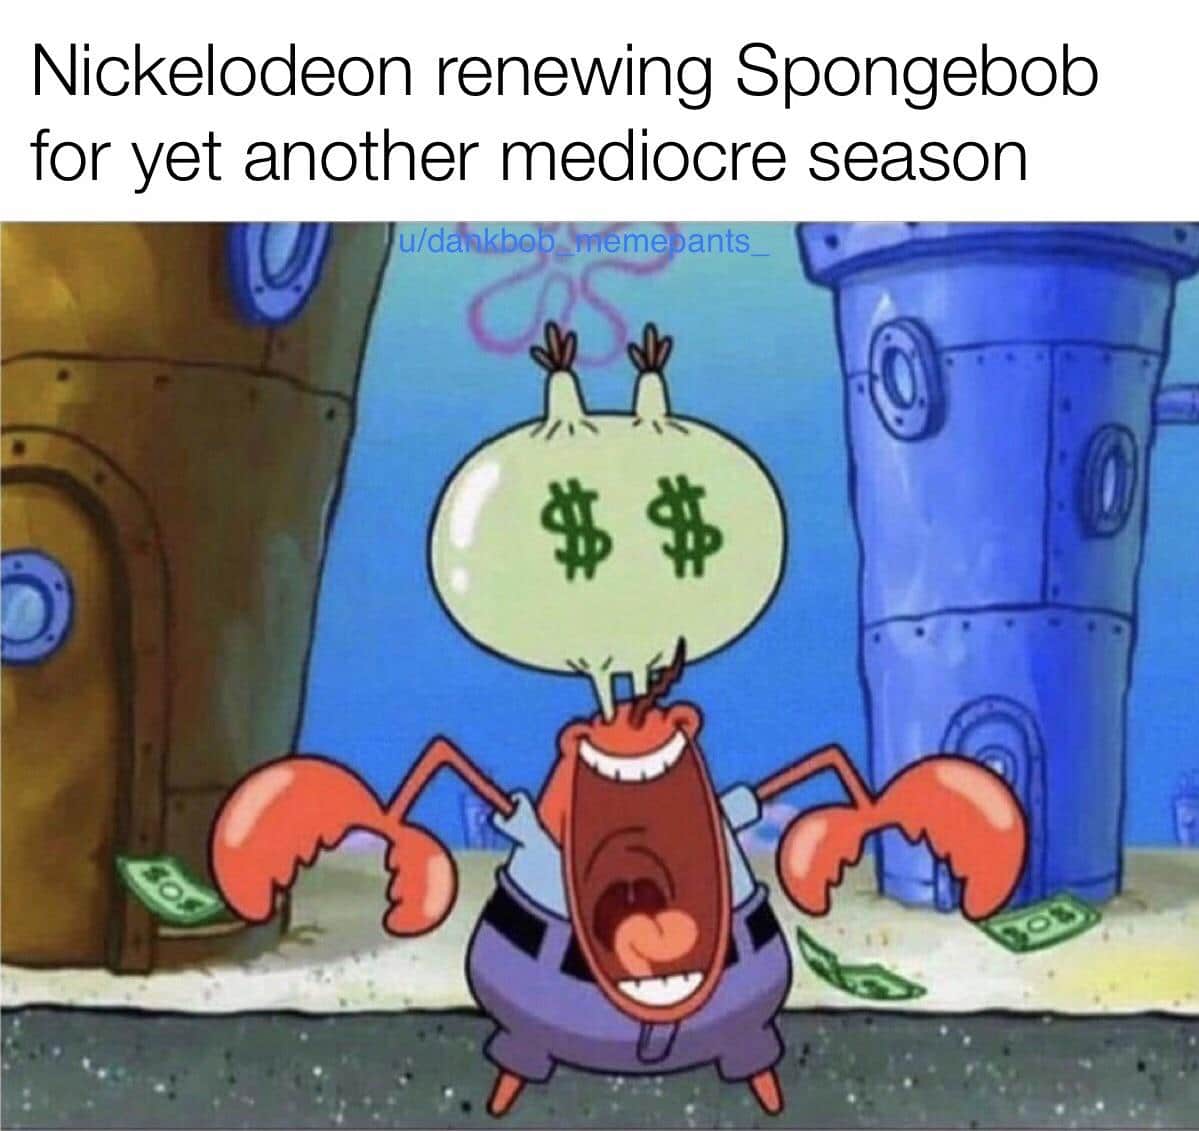 Spongebob, Money Spongebob Memes Spongebob, Money text: Nickelodeon renewing Spongebob for yet another mediocre season me an s 